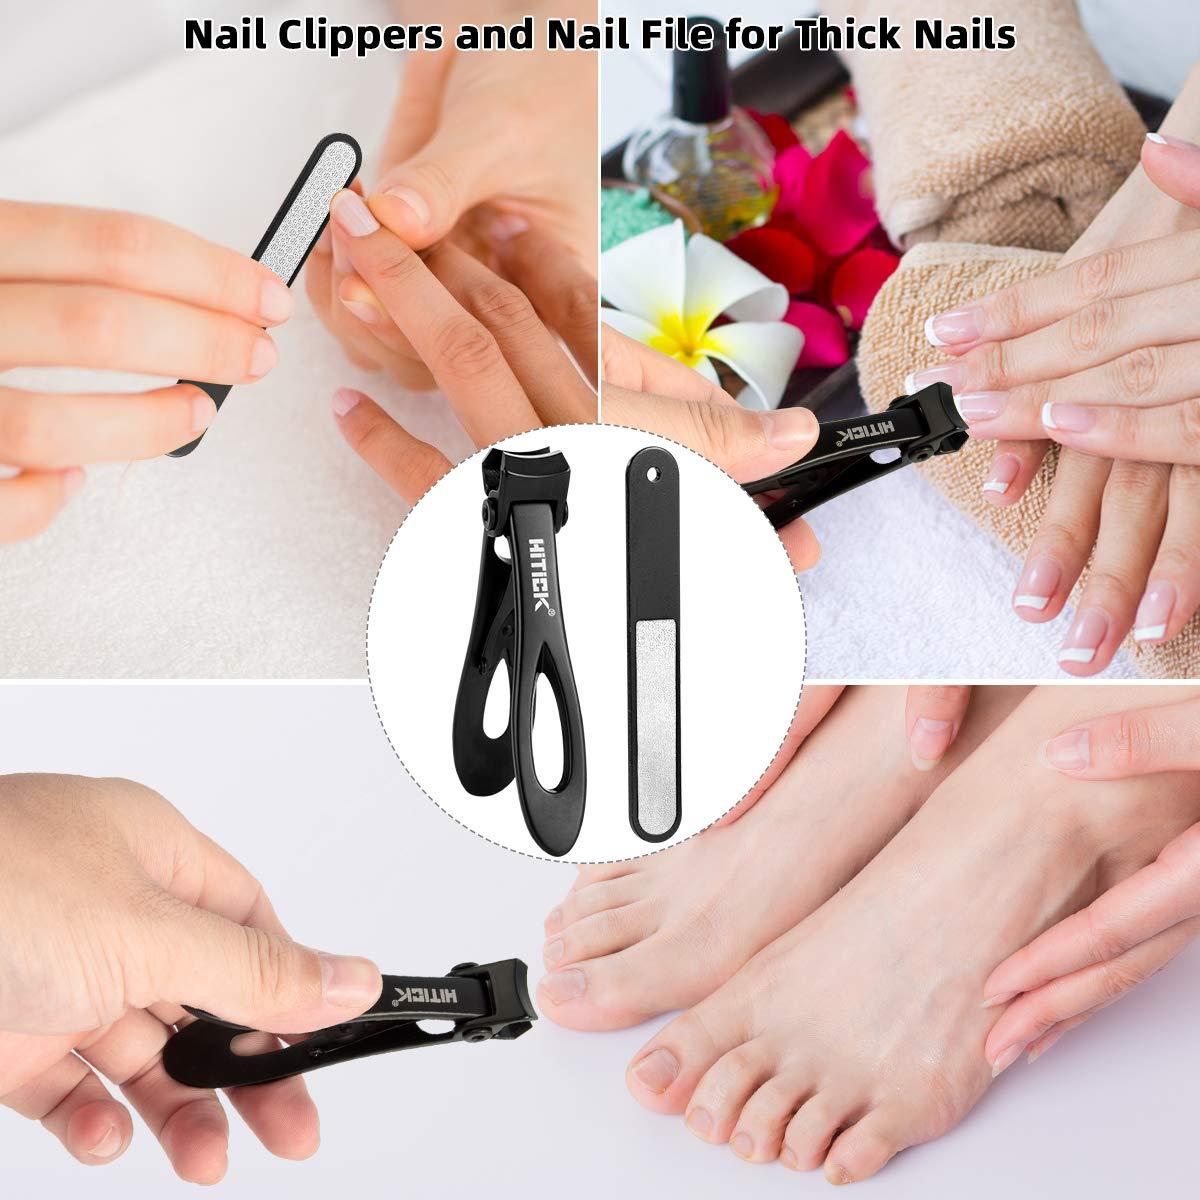 Toenail Clippers Nail Correction Thick Nails Ingrown Toenails Nippers  Cutters | eBay